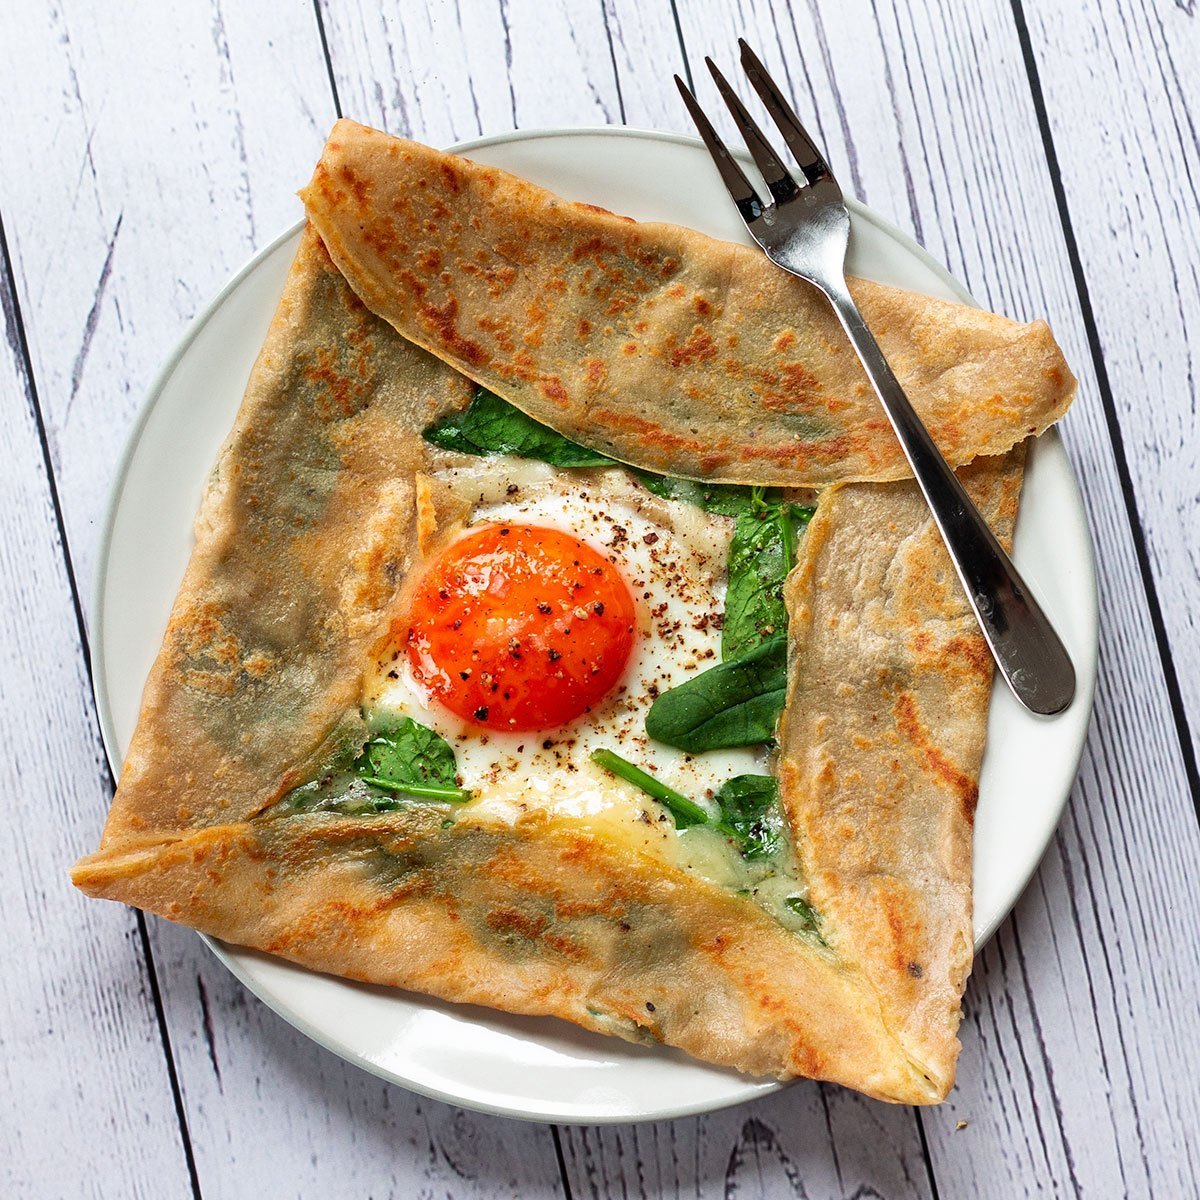 🇫🇷 Galette Sarrasin Buckwheat Crepe Instant Mix by Francine, 15.5 oz